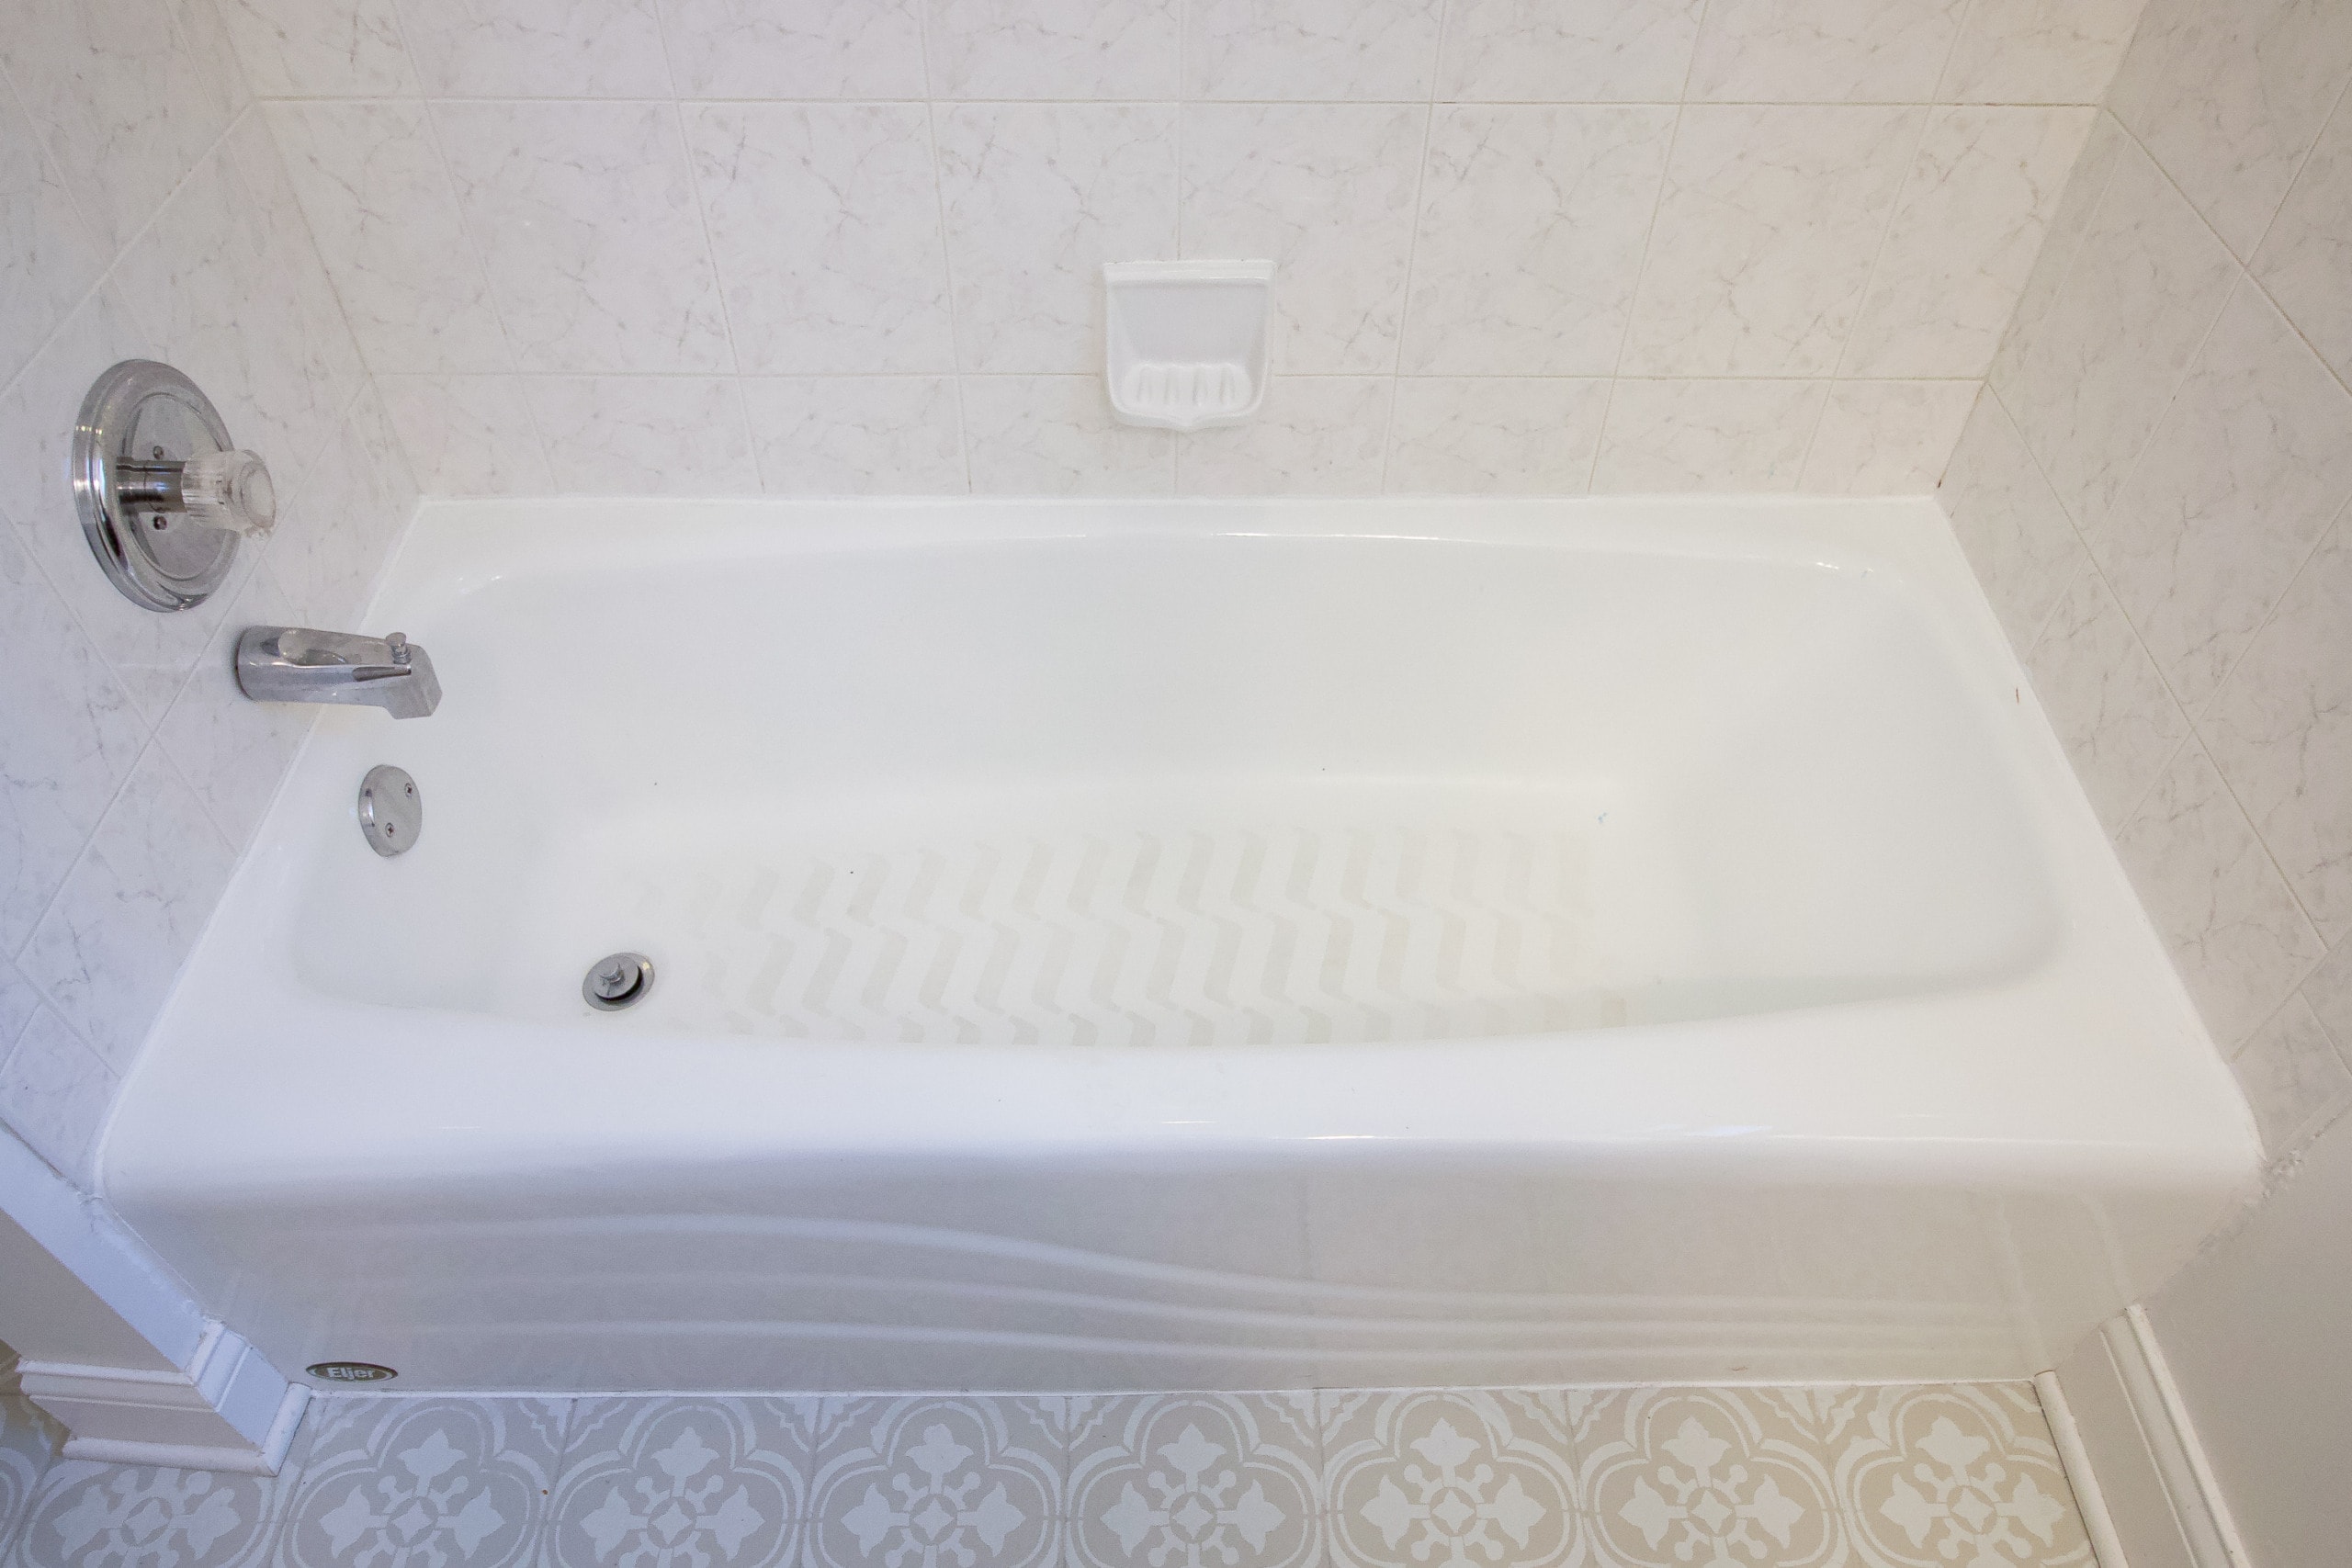 How to prep your bathtub to paint it